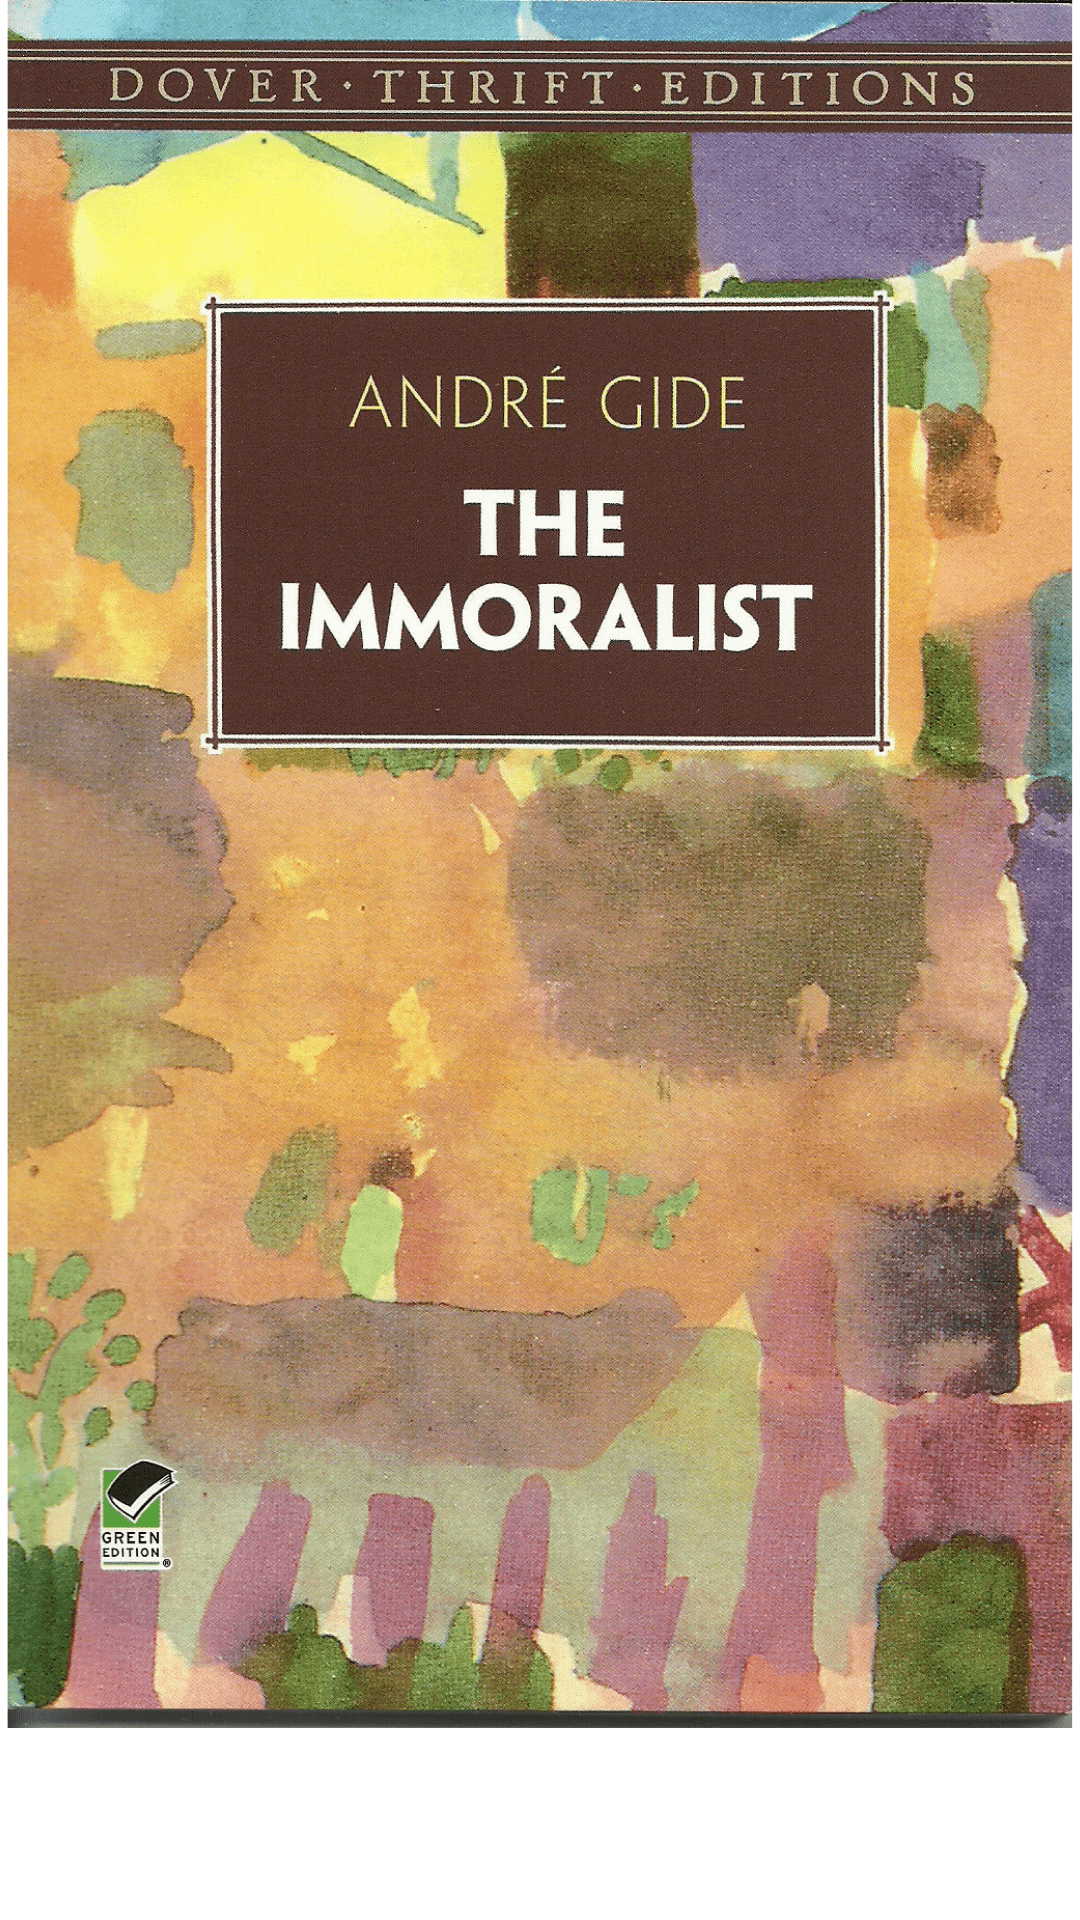 Immoralist by Andre Gide